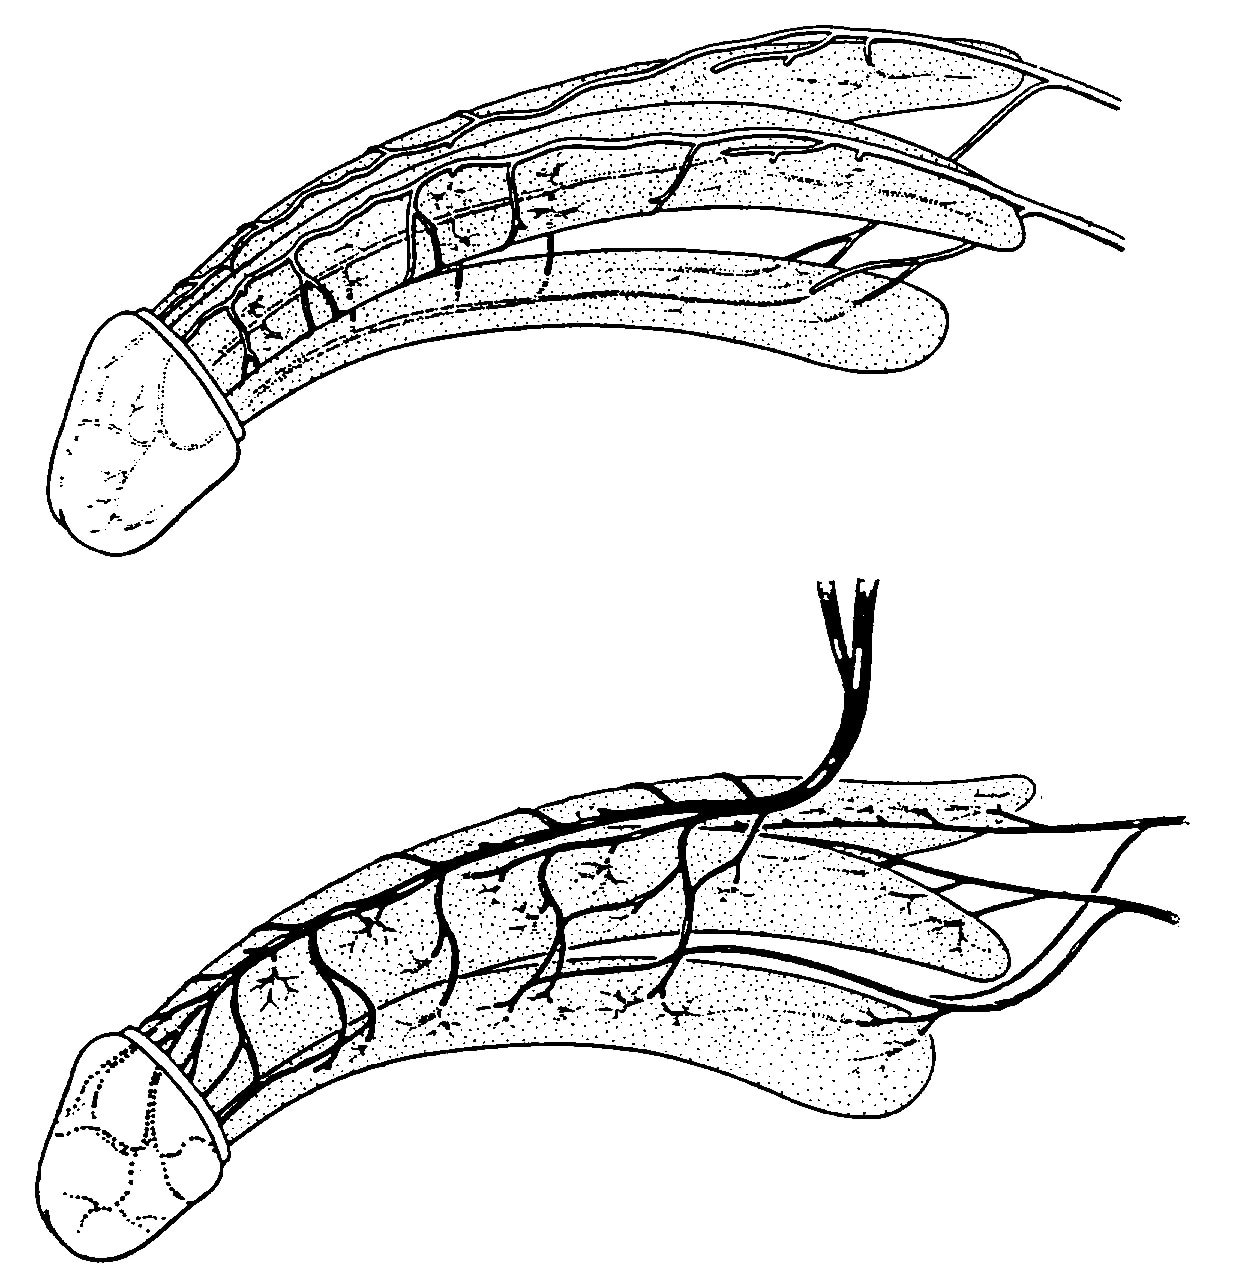 Two Illustrations Of The Penis The Top One Showing The Arteries Of The